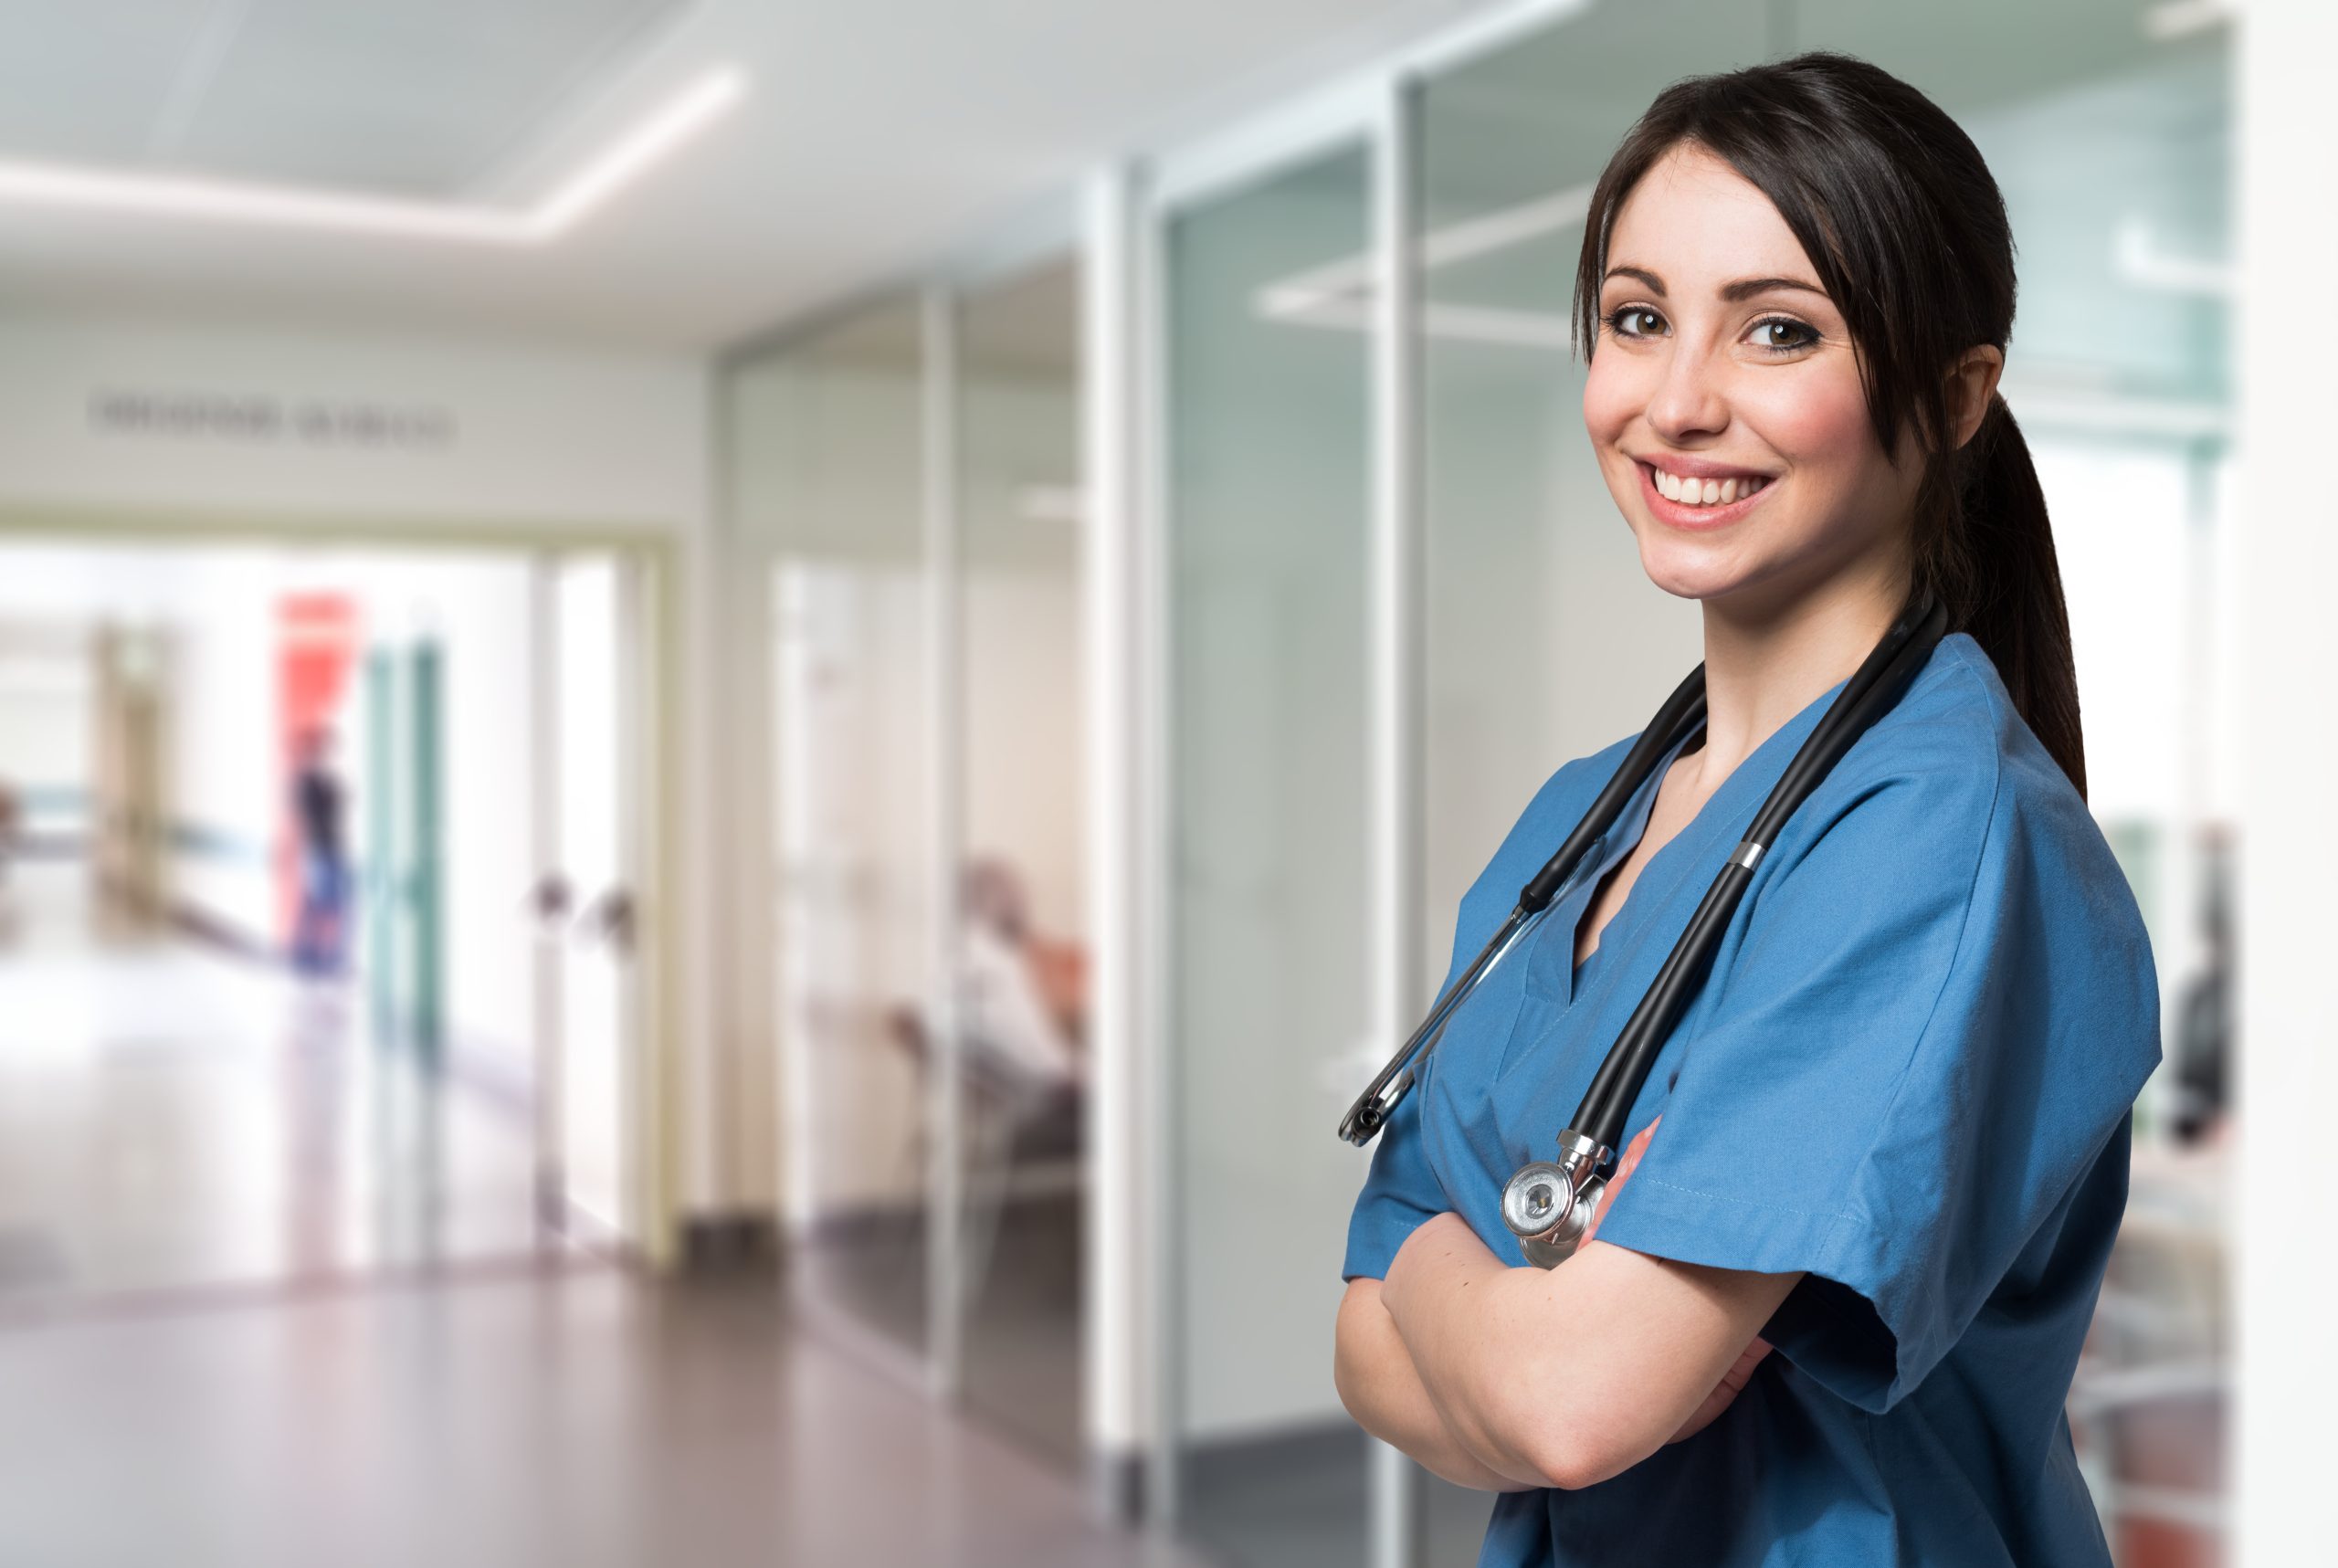 An image of a nurse for our ranking of 30 Best Online Bachelor’s in Nursing (BSN)